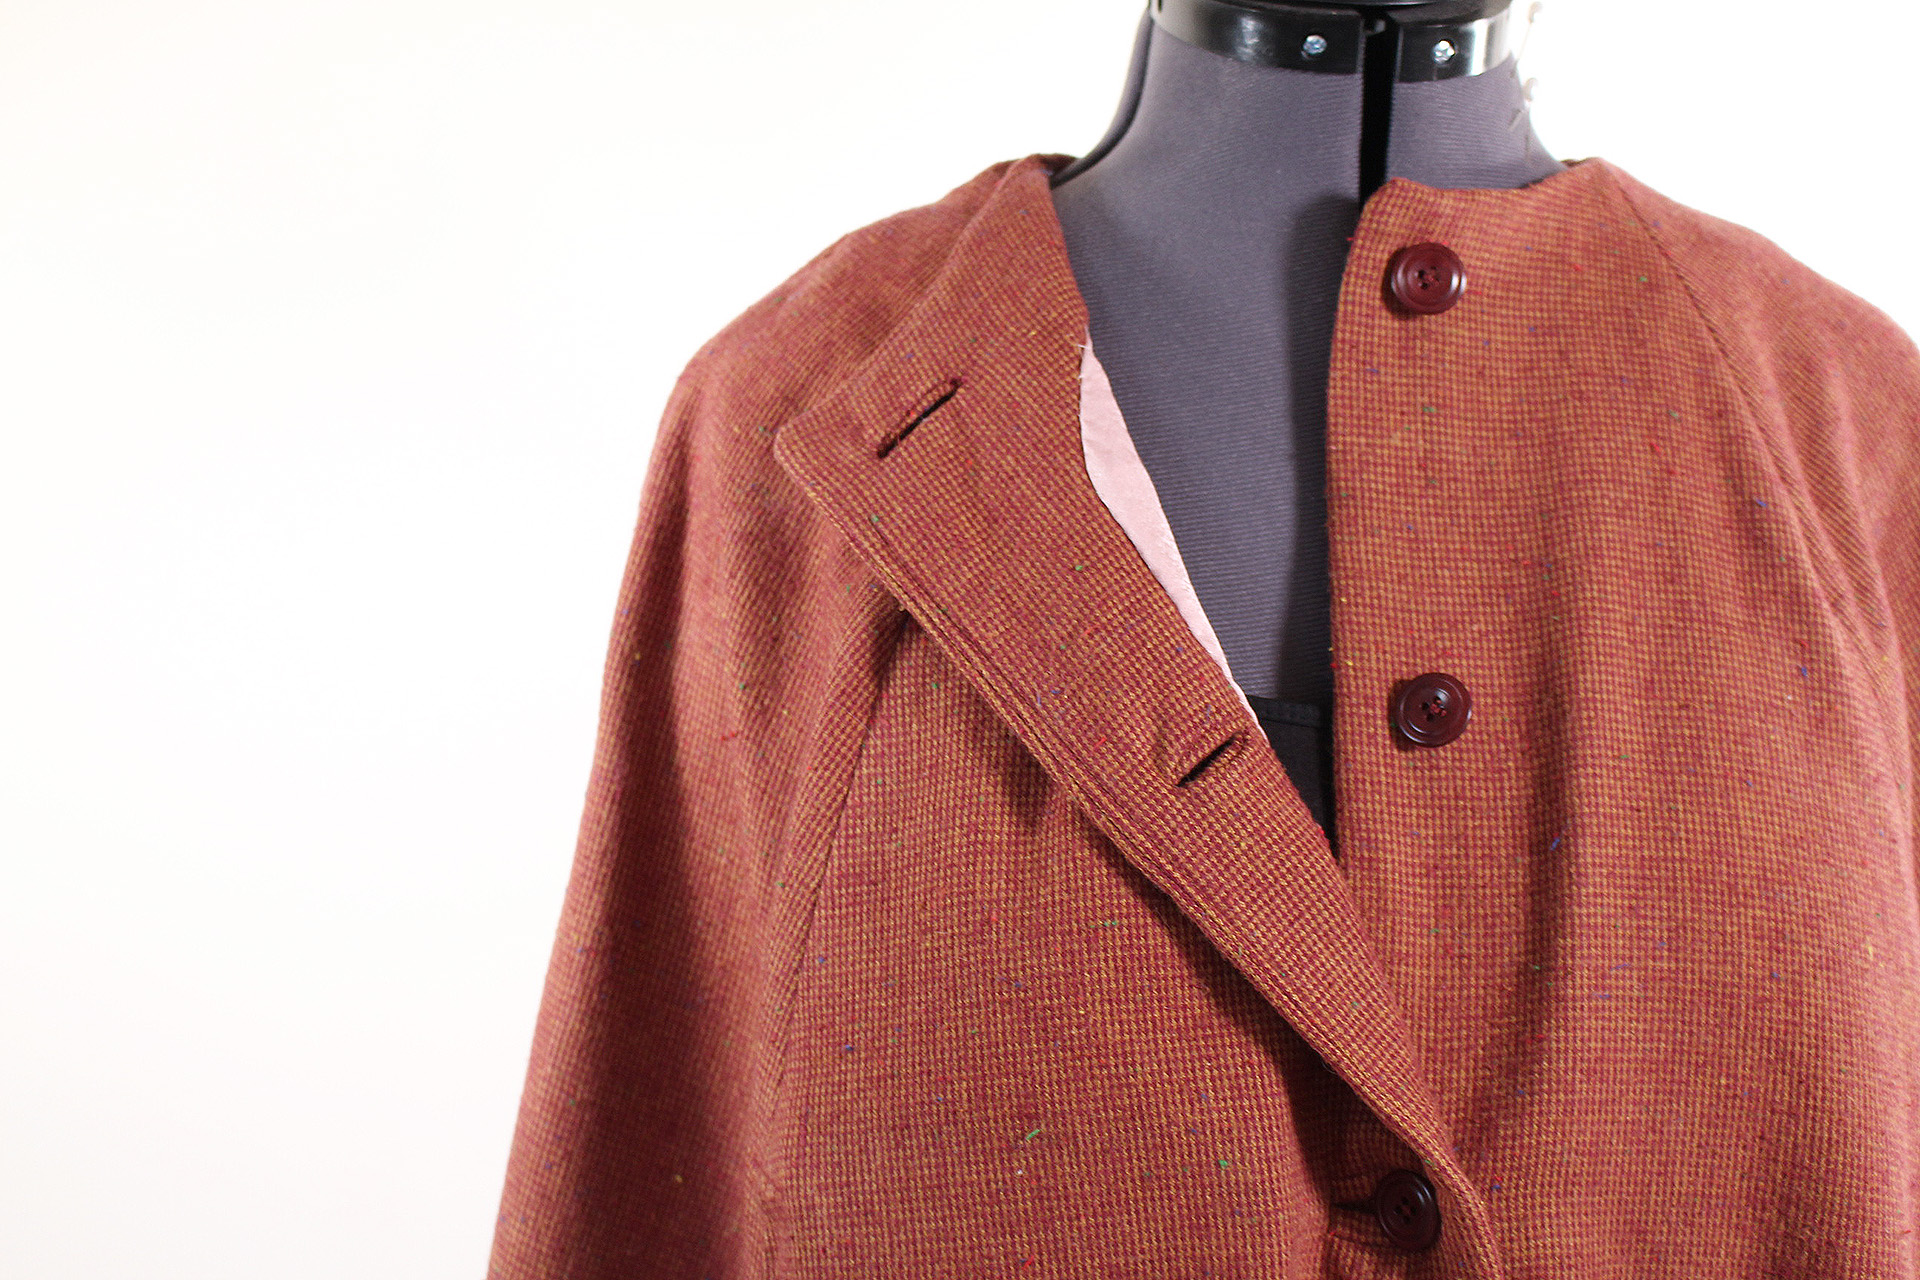 The Seamwork Camden cape, video walk through, with information on how to upgrade and expand on this great vintage style cape | Vintage on Tap